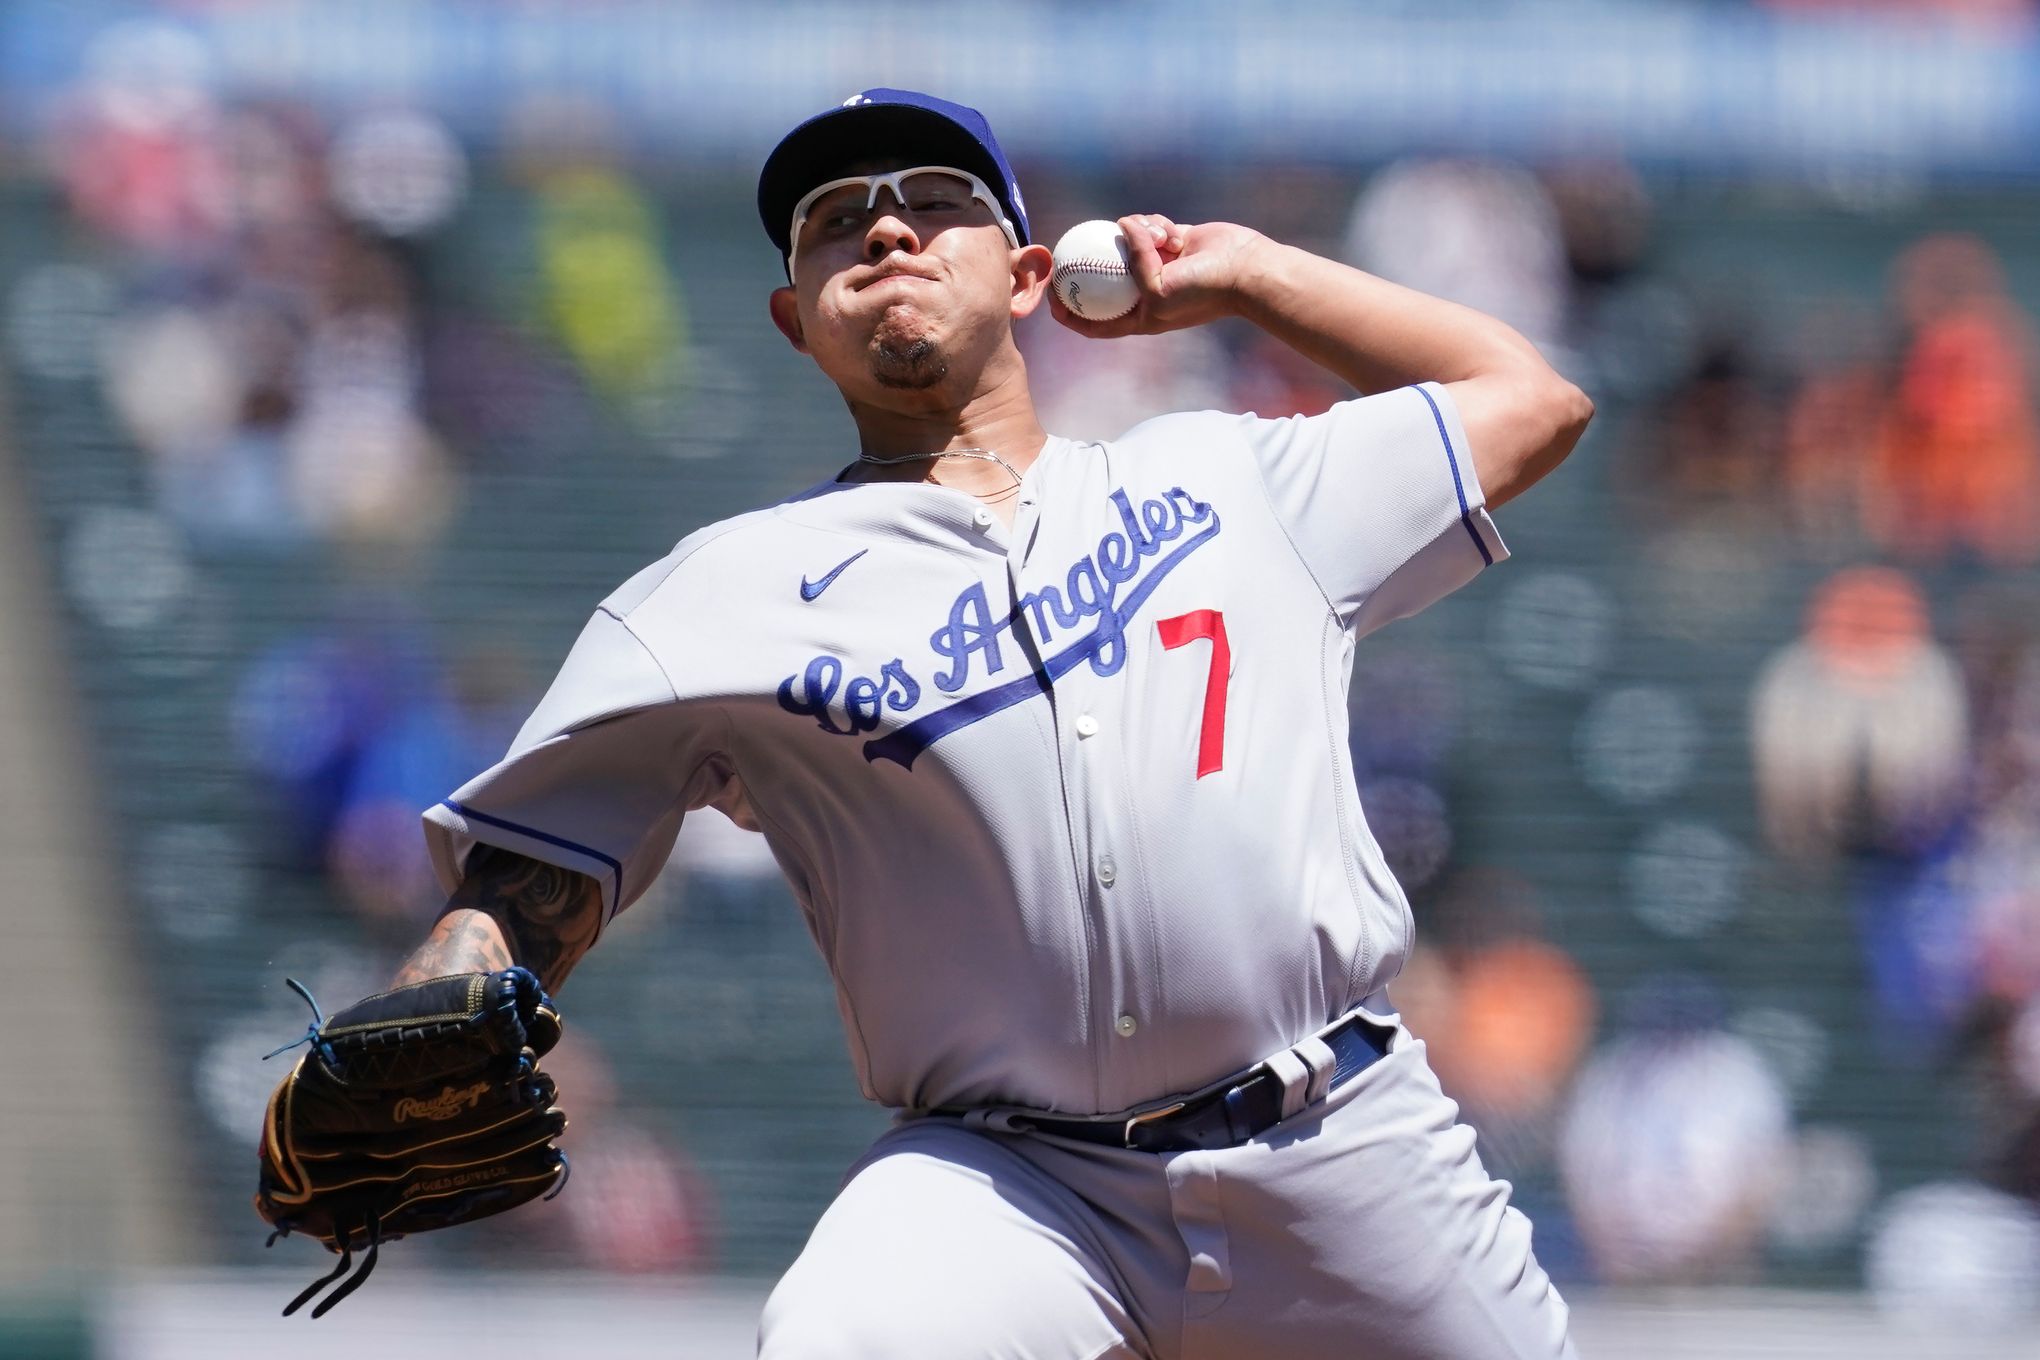 Dodgers 19-year-old pitching prospect Julio Urias slated for MLB debut